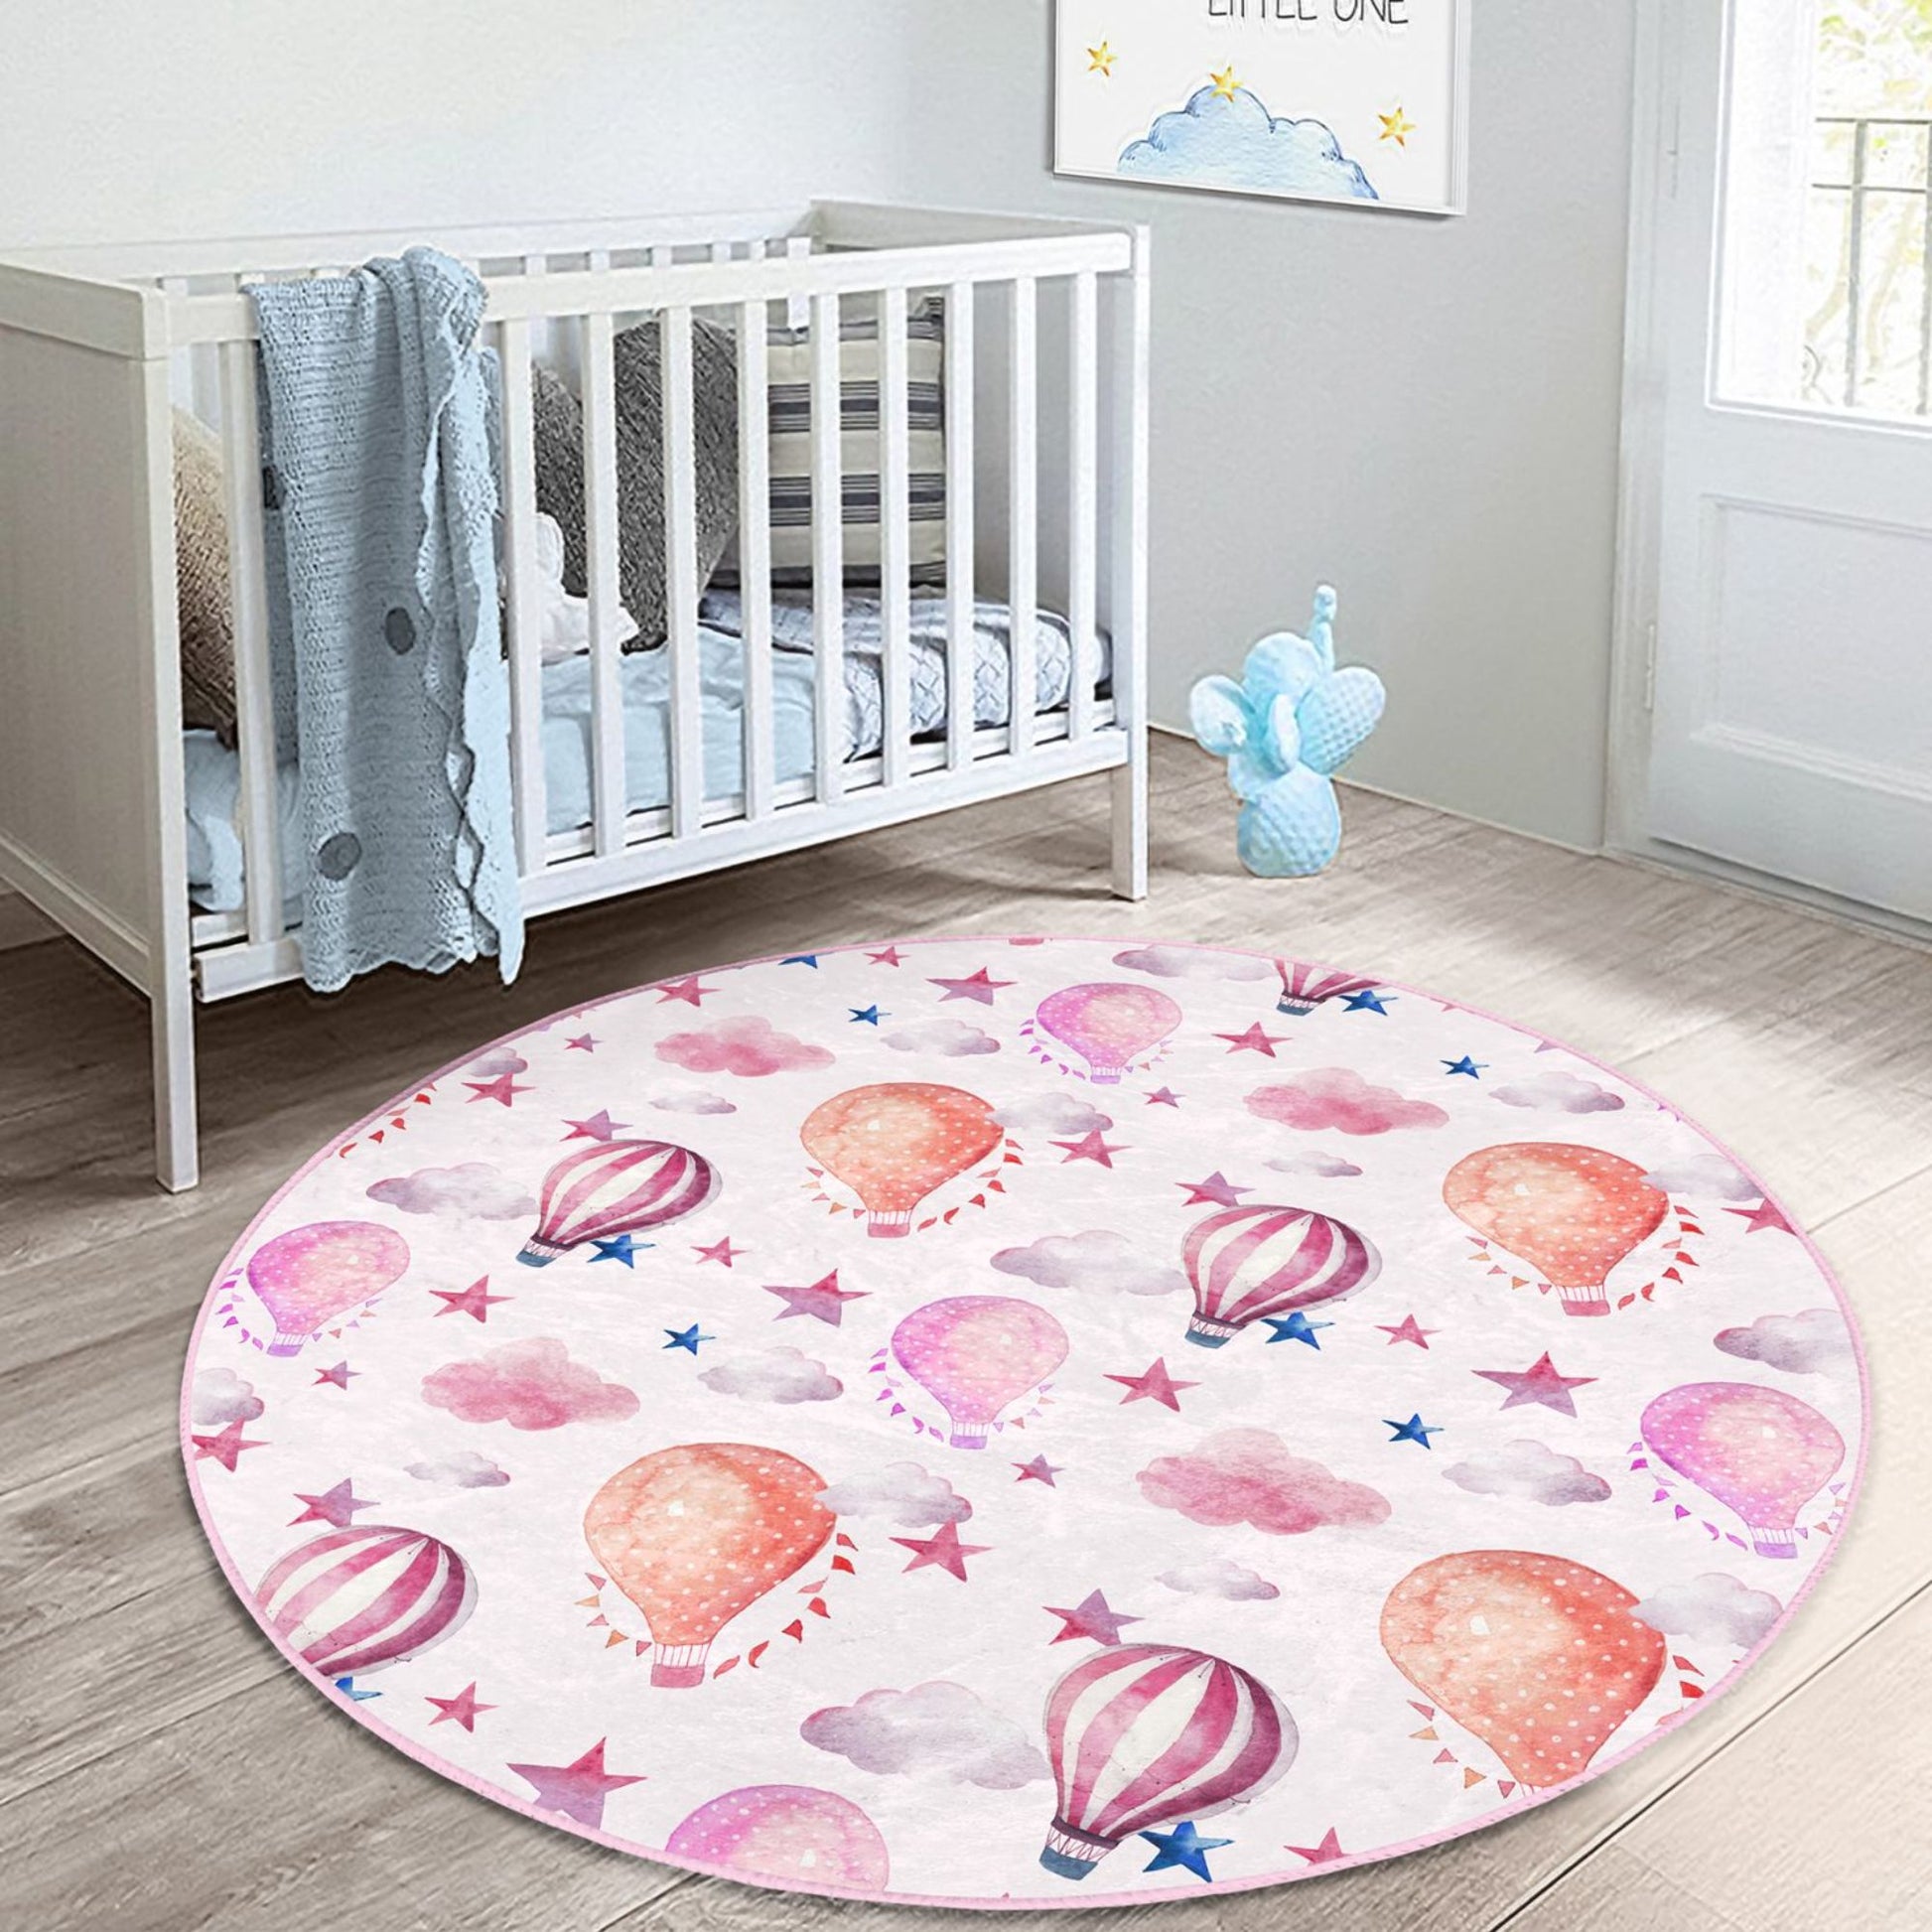 Homeezone Kids Rug - Elevate Your Child's Space